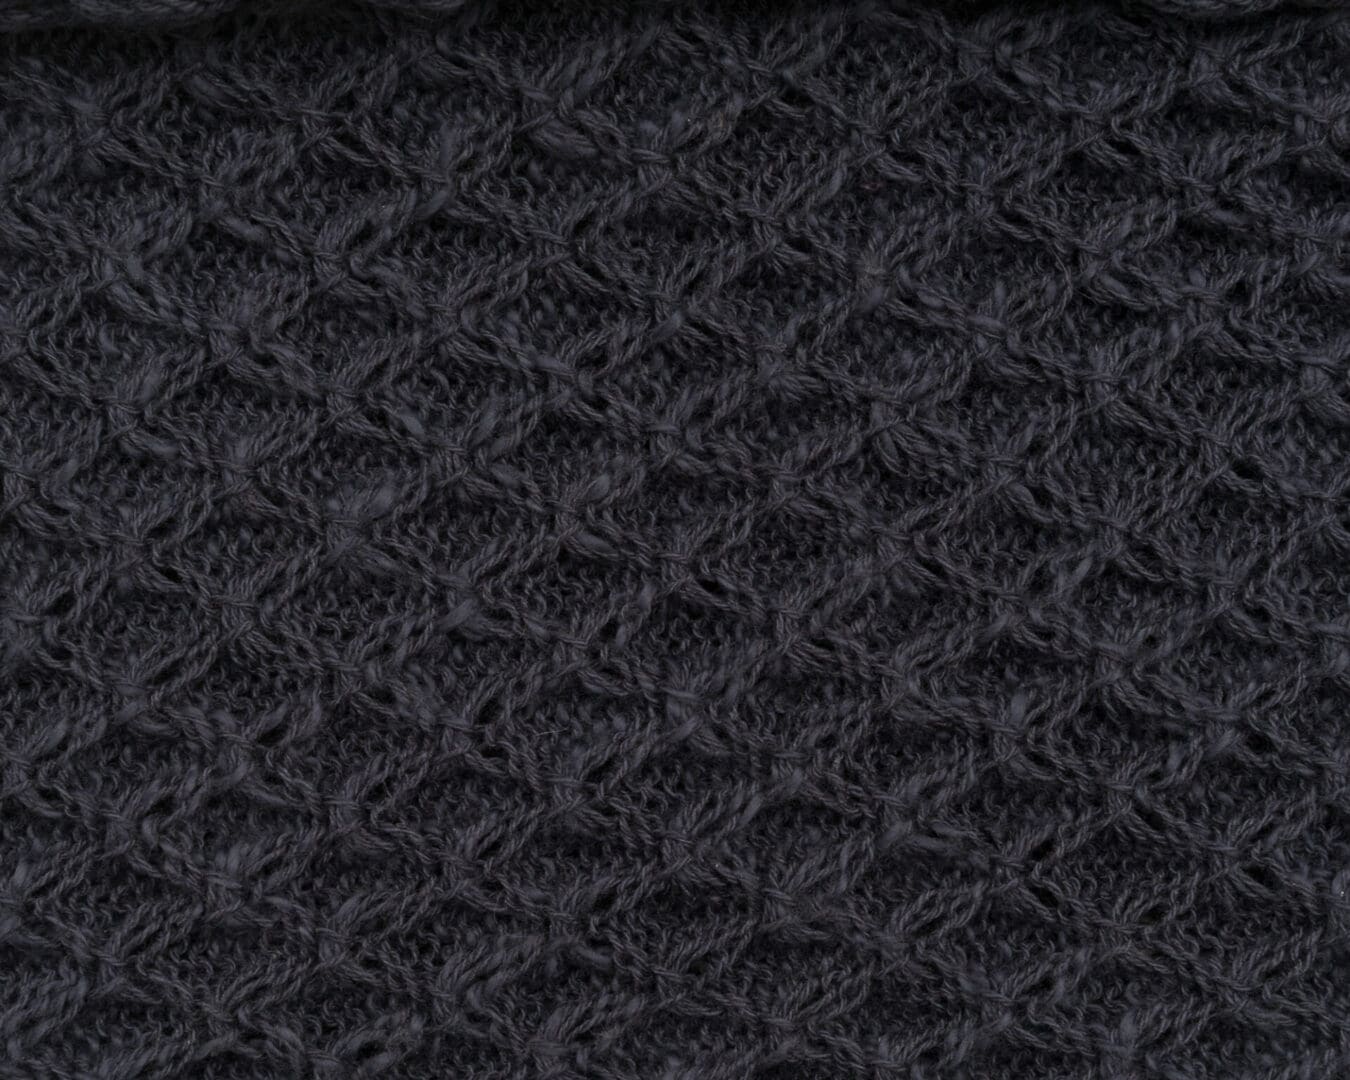 handmade knitted charcoal grey patterned cowl